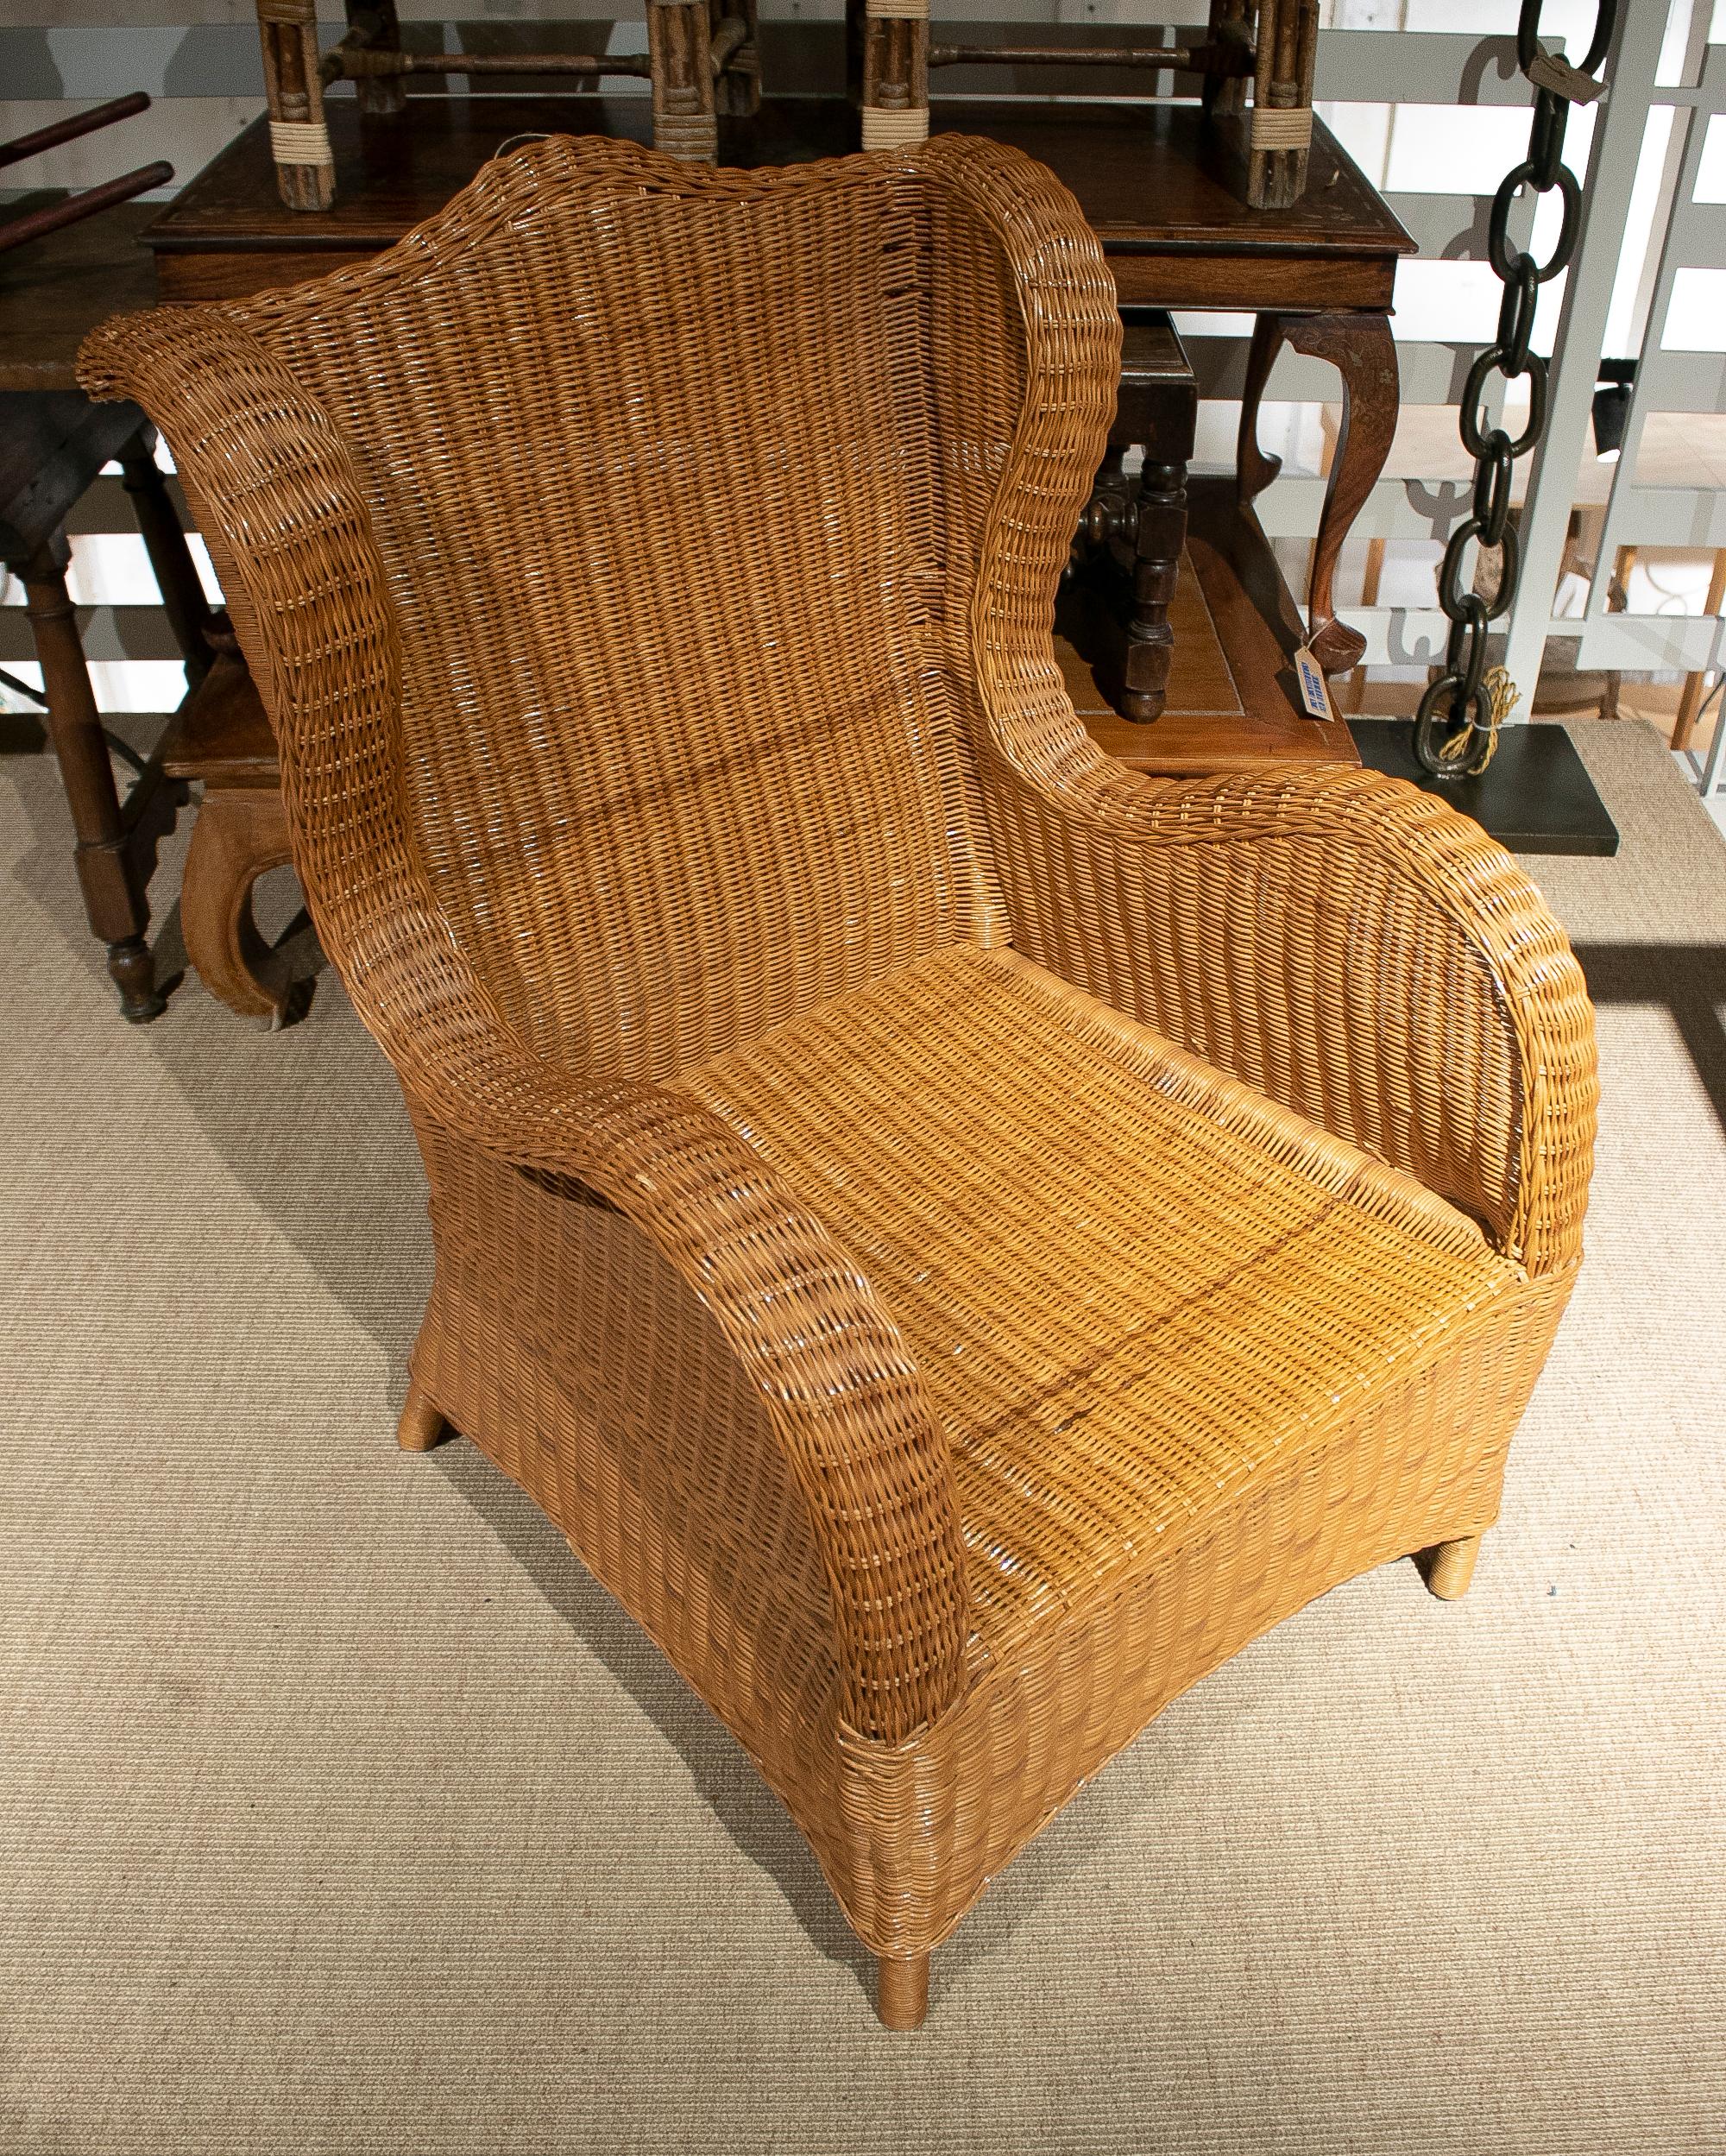 Vintage 1970s Spanish hand woven wicker wing chair.